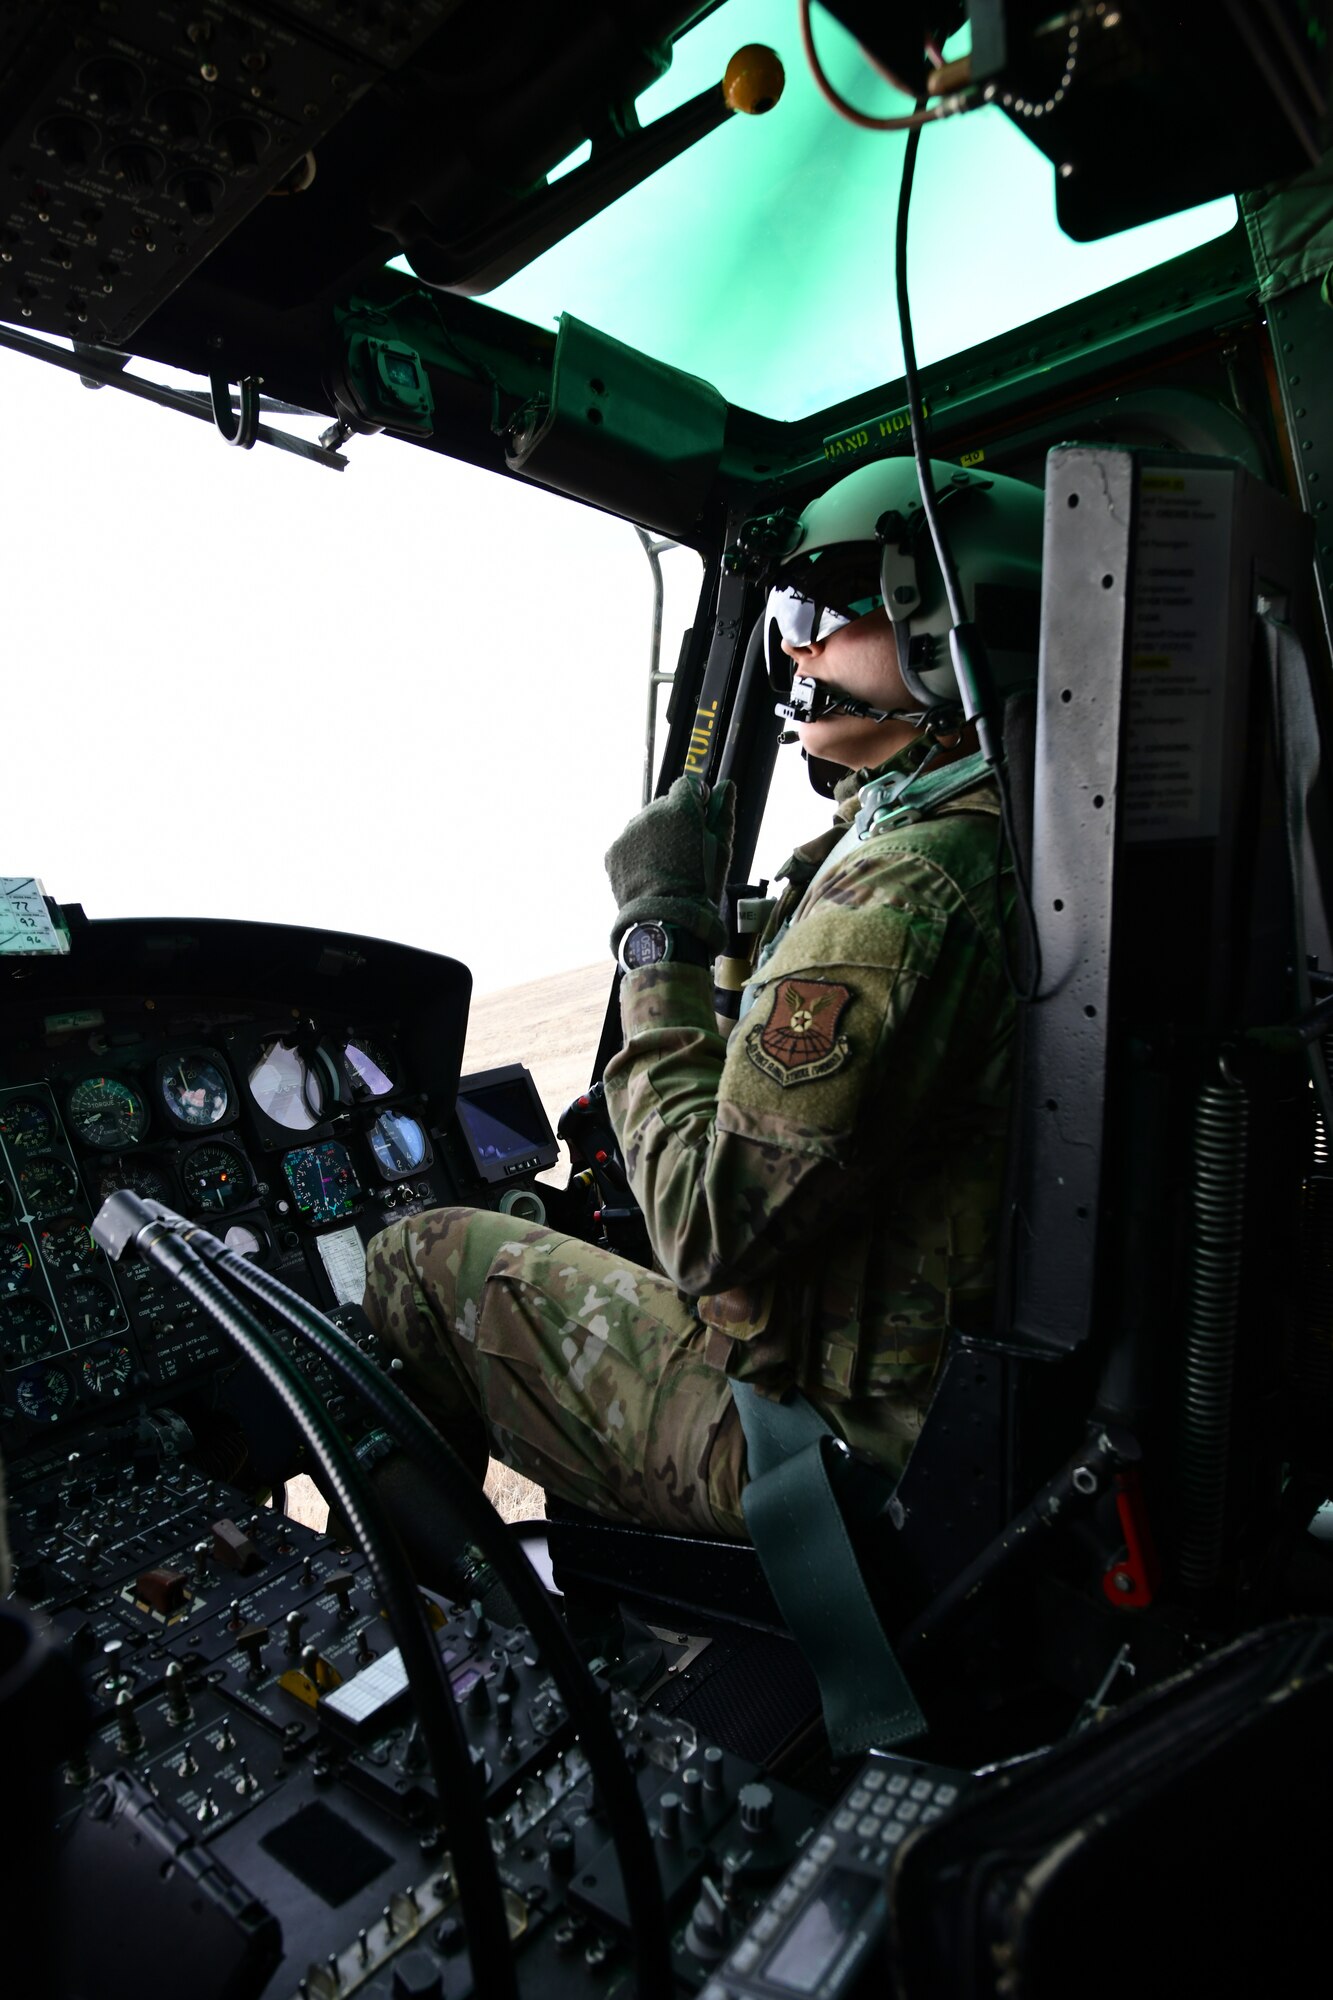 Capt. Nicole Poupart, 37th Helicopter Squadron pilot, flies the UH-1N Huey February 15, 2022 over Wyoming and Colorado. The 37 HS helps the 90th Missile Wing by providing aerial protection to its Airmen and mission. (U.S. Air Force photon by Airman Sarah Post)